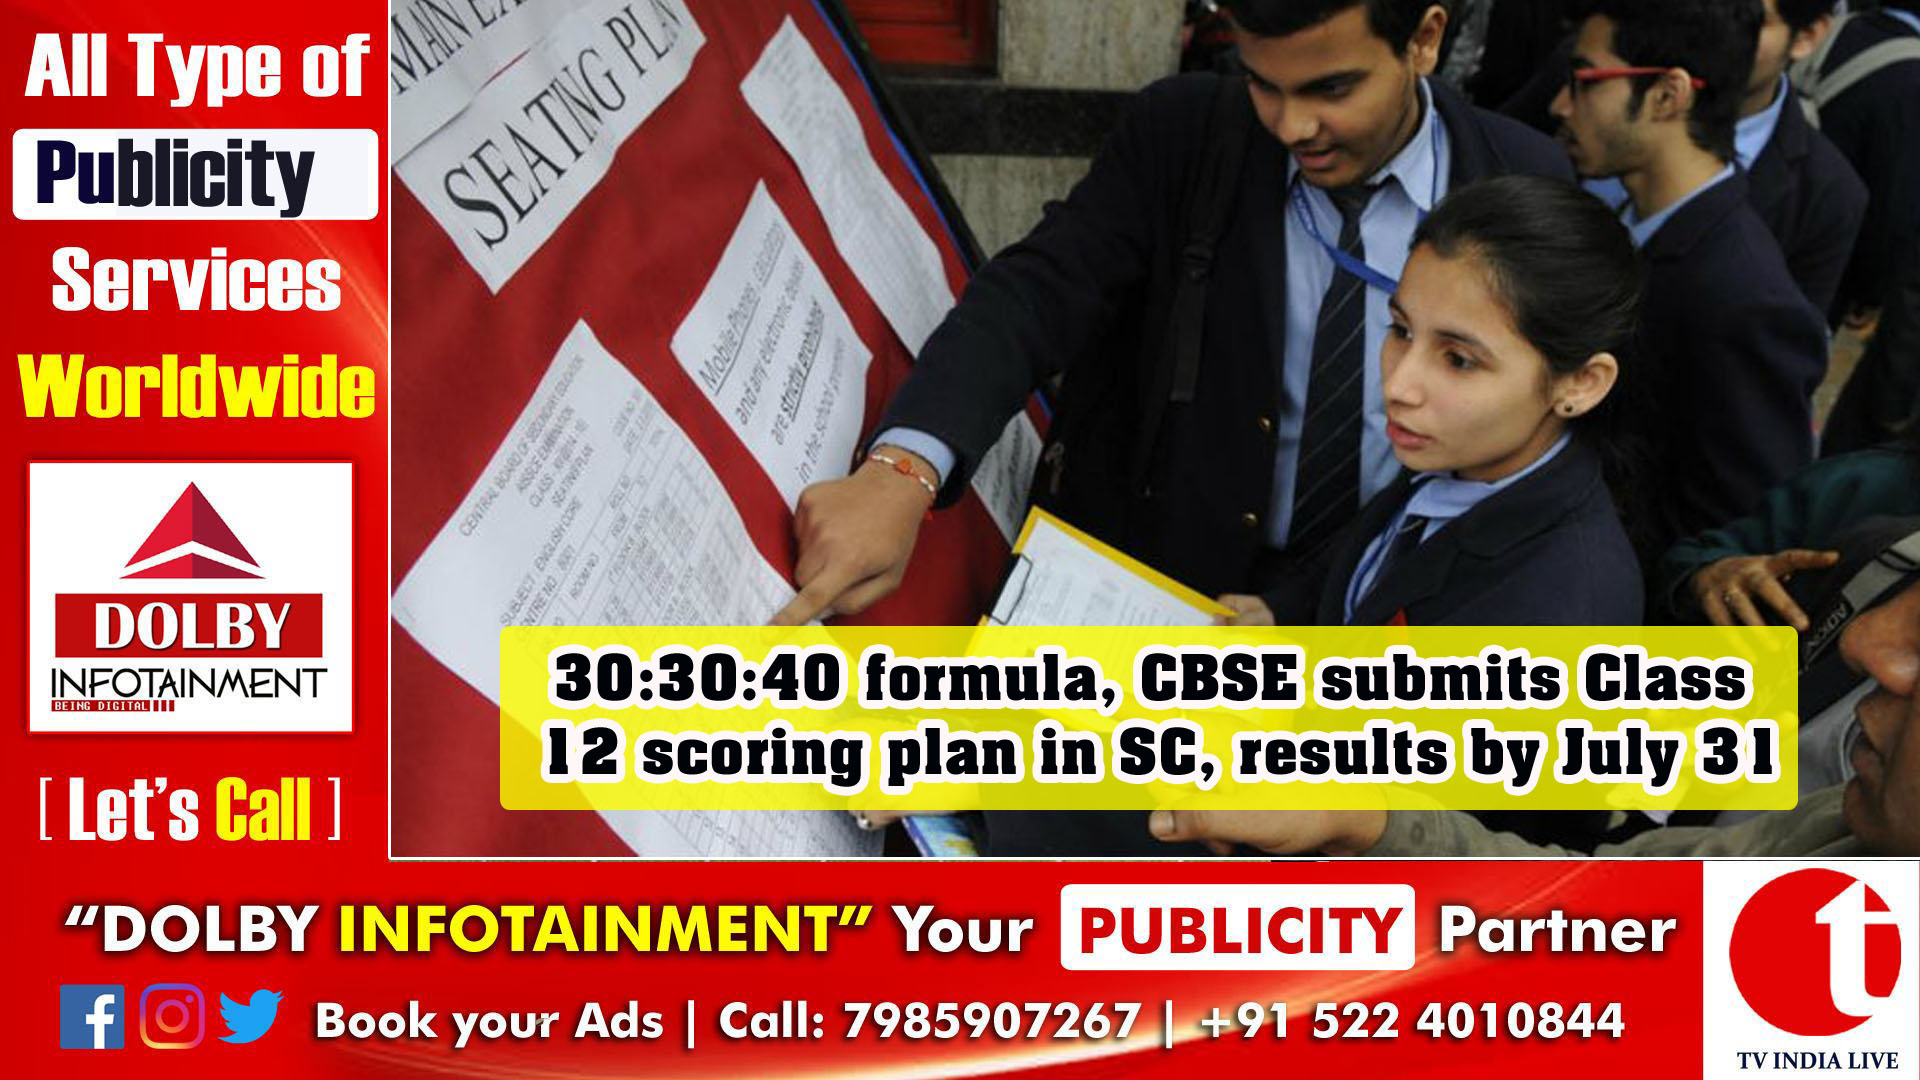 30:30:40 formula, CBSE submits Class 12 scoring plan in SC, results by July 31